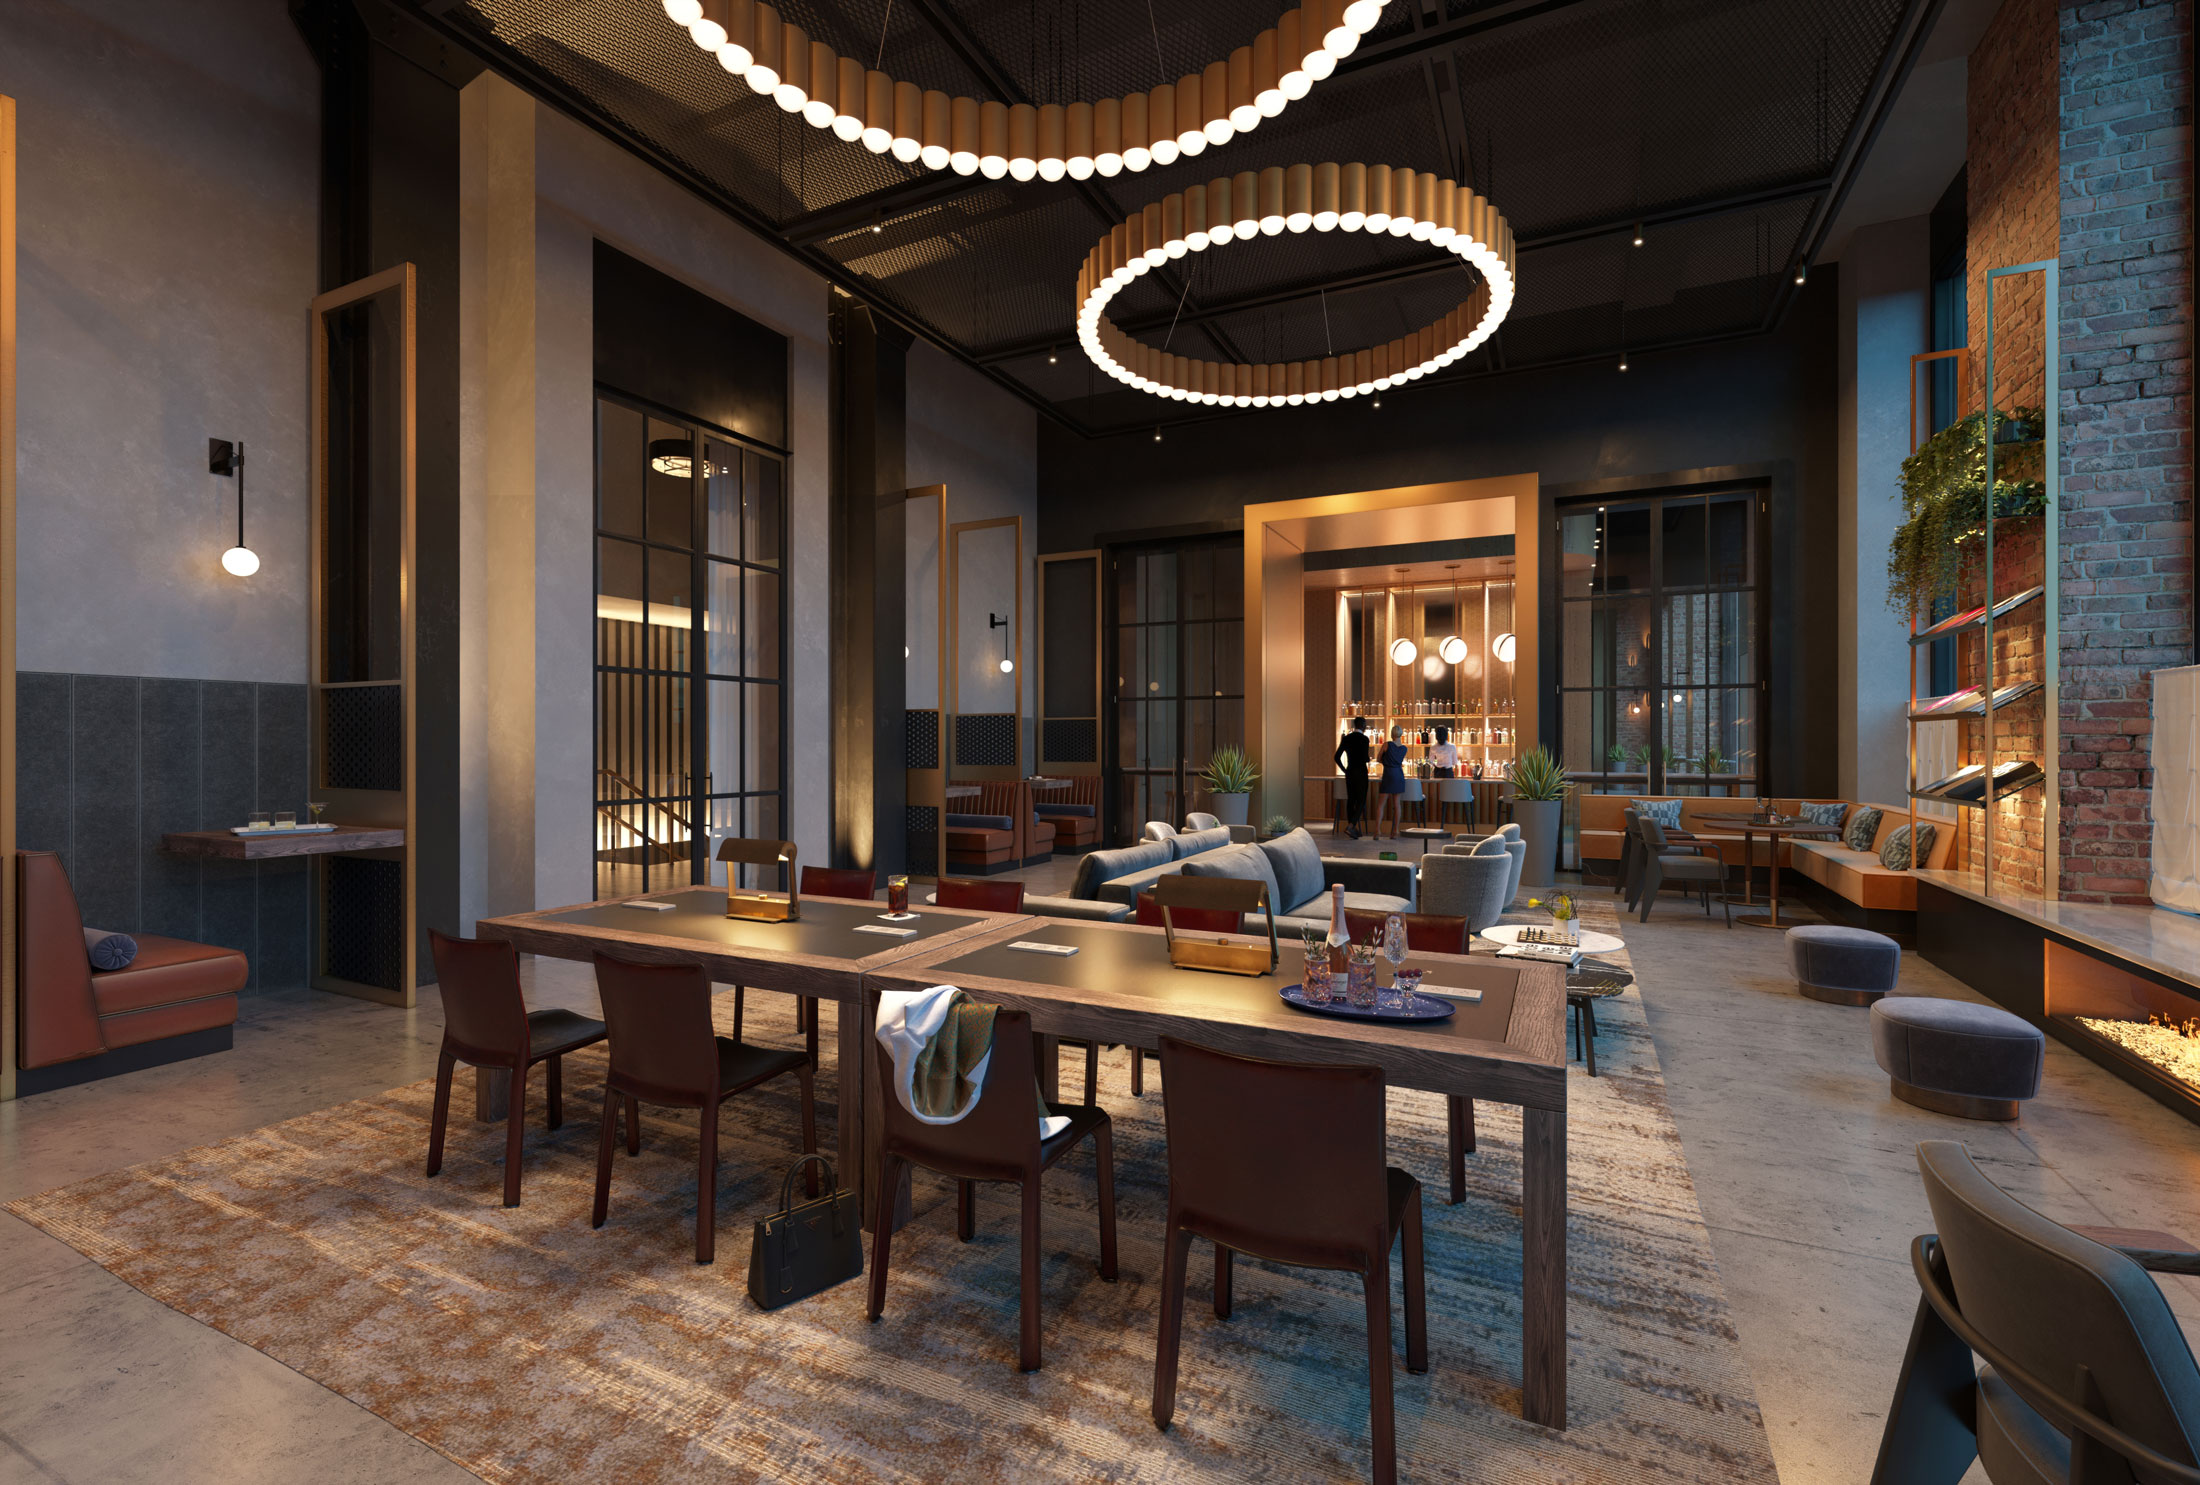 Architectural Rendering of the lounge of the 149 Madison project located in New York City